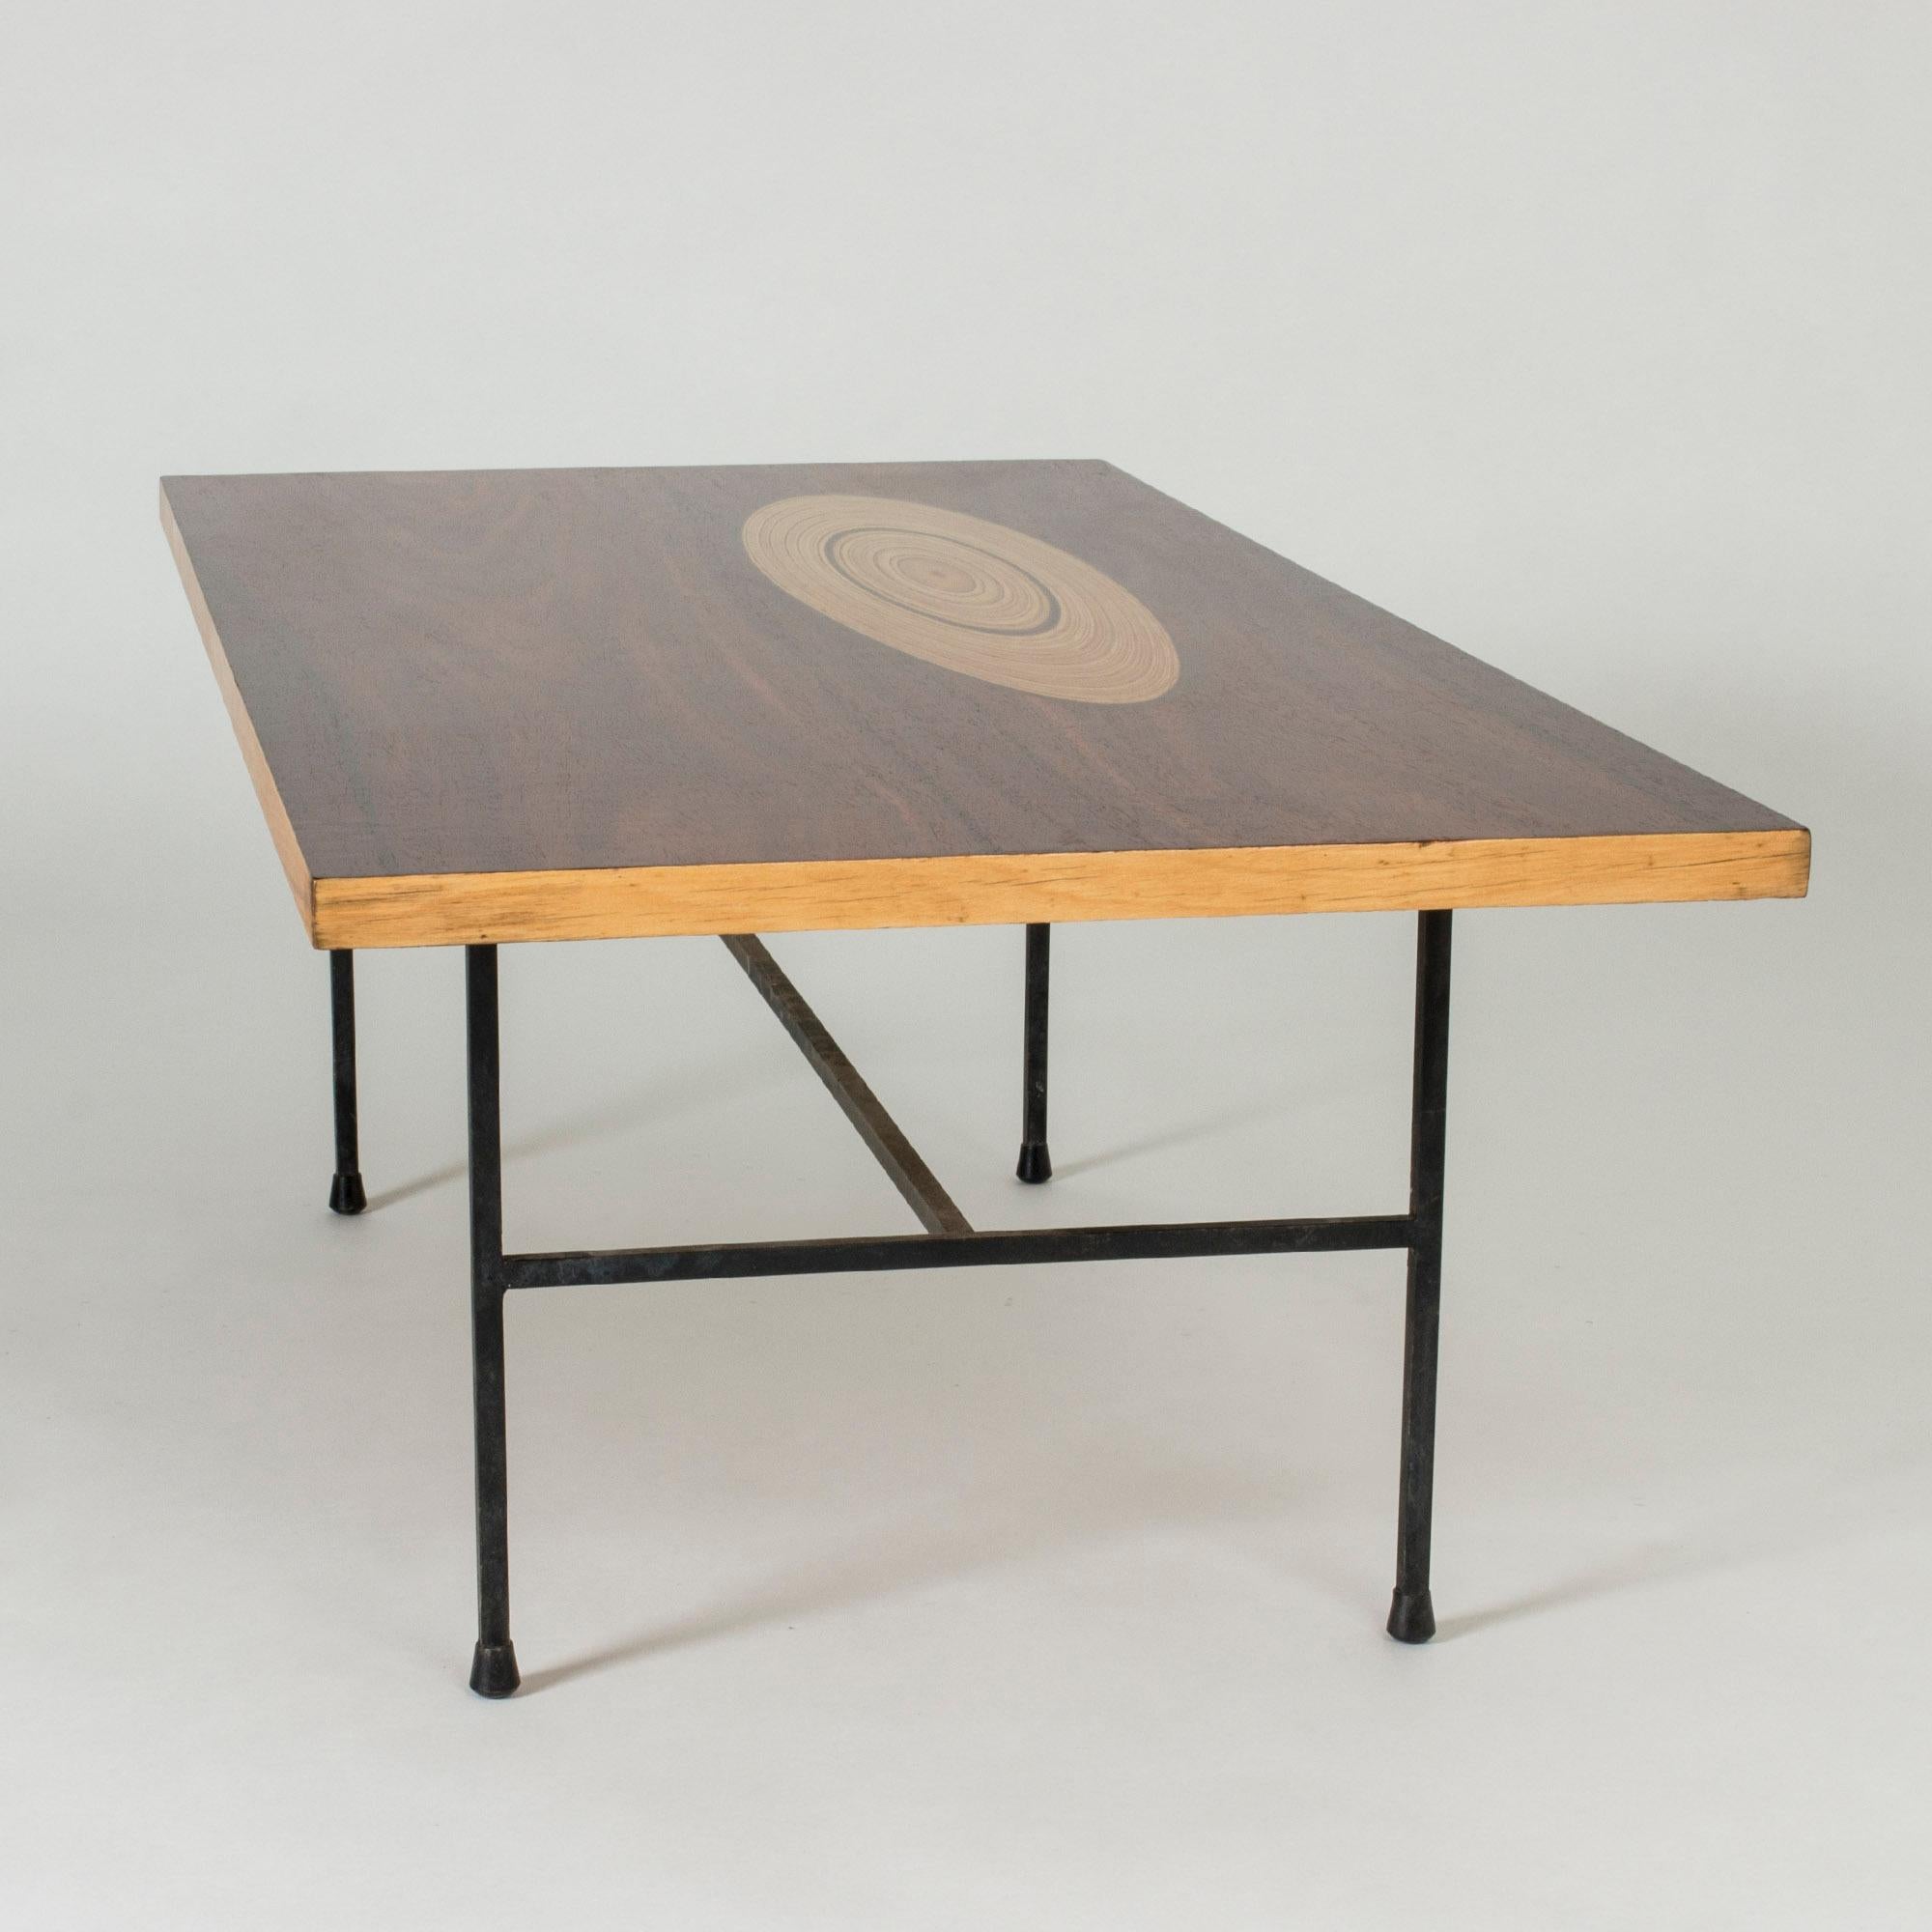 Stunning coffee table by Tapio Wirkkala, with a rosewood top inlayed with an oval shape of contrasting wood that has a growth ring-like pattern. Exquisitely restored. Sturdy base made from black lacquered metal.